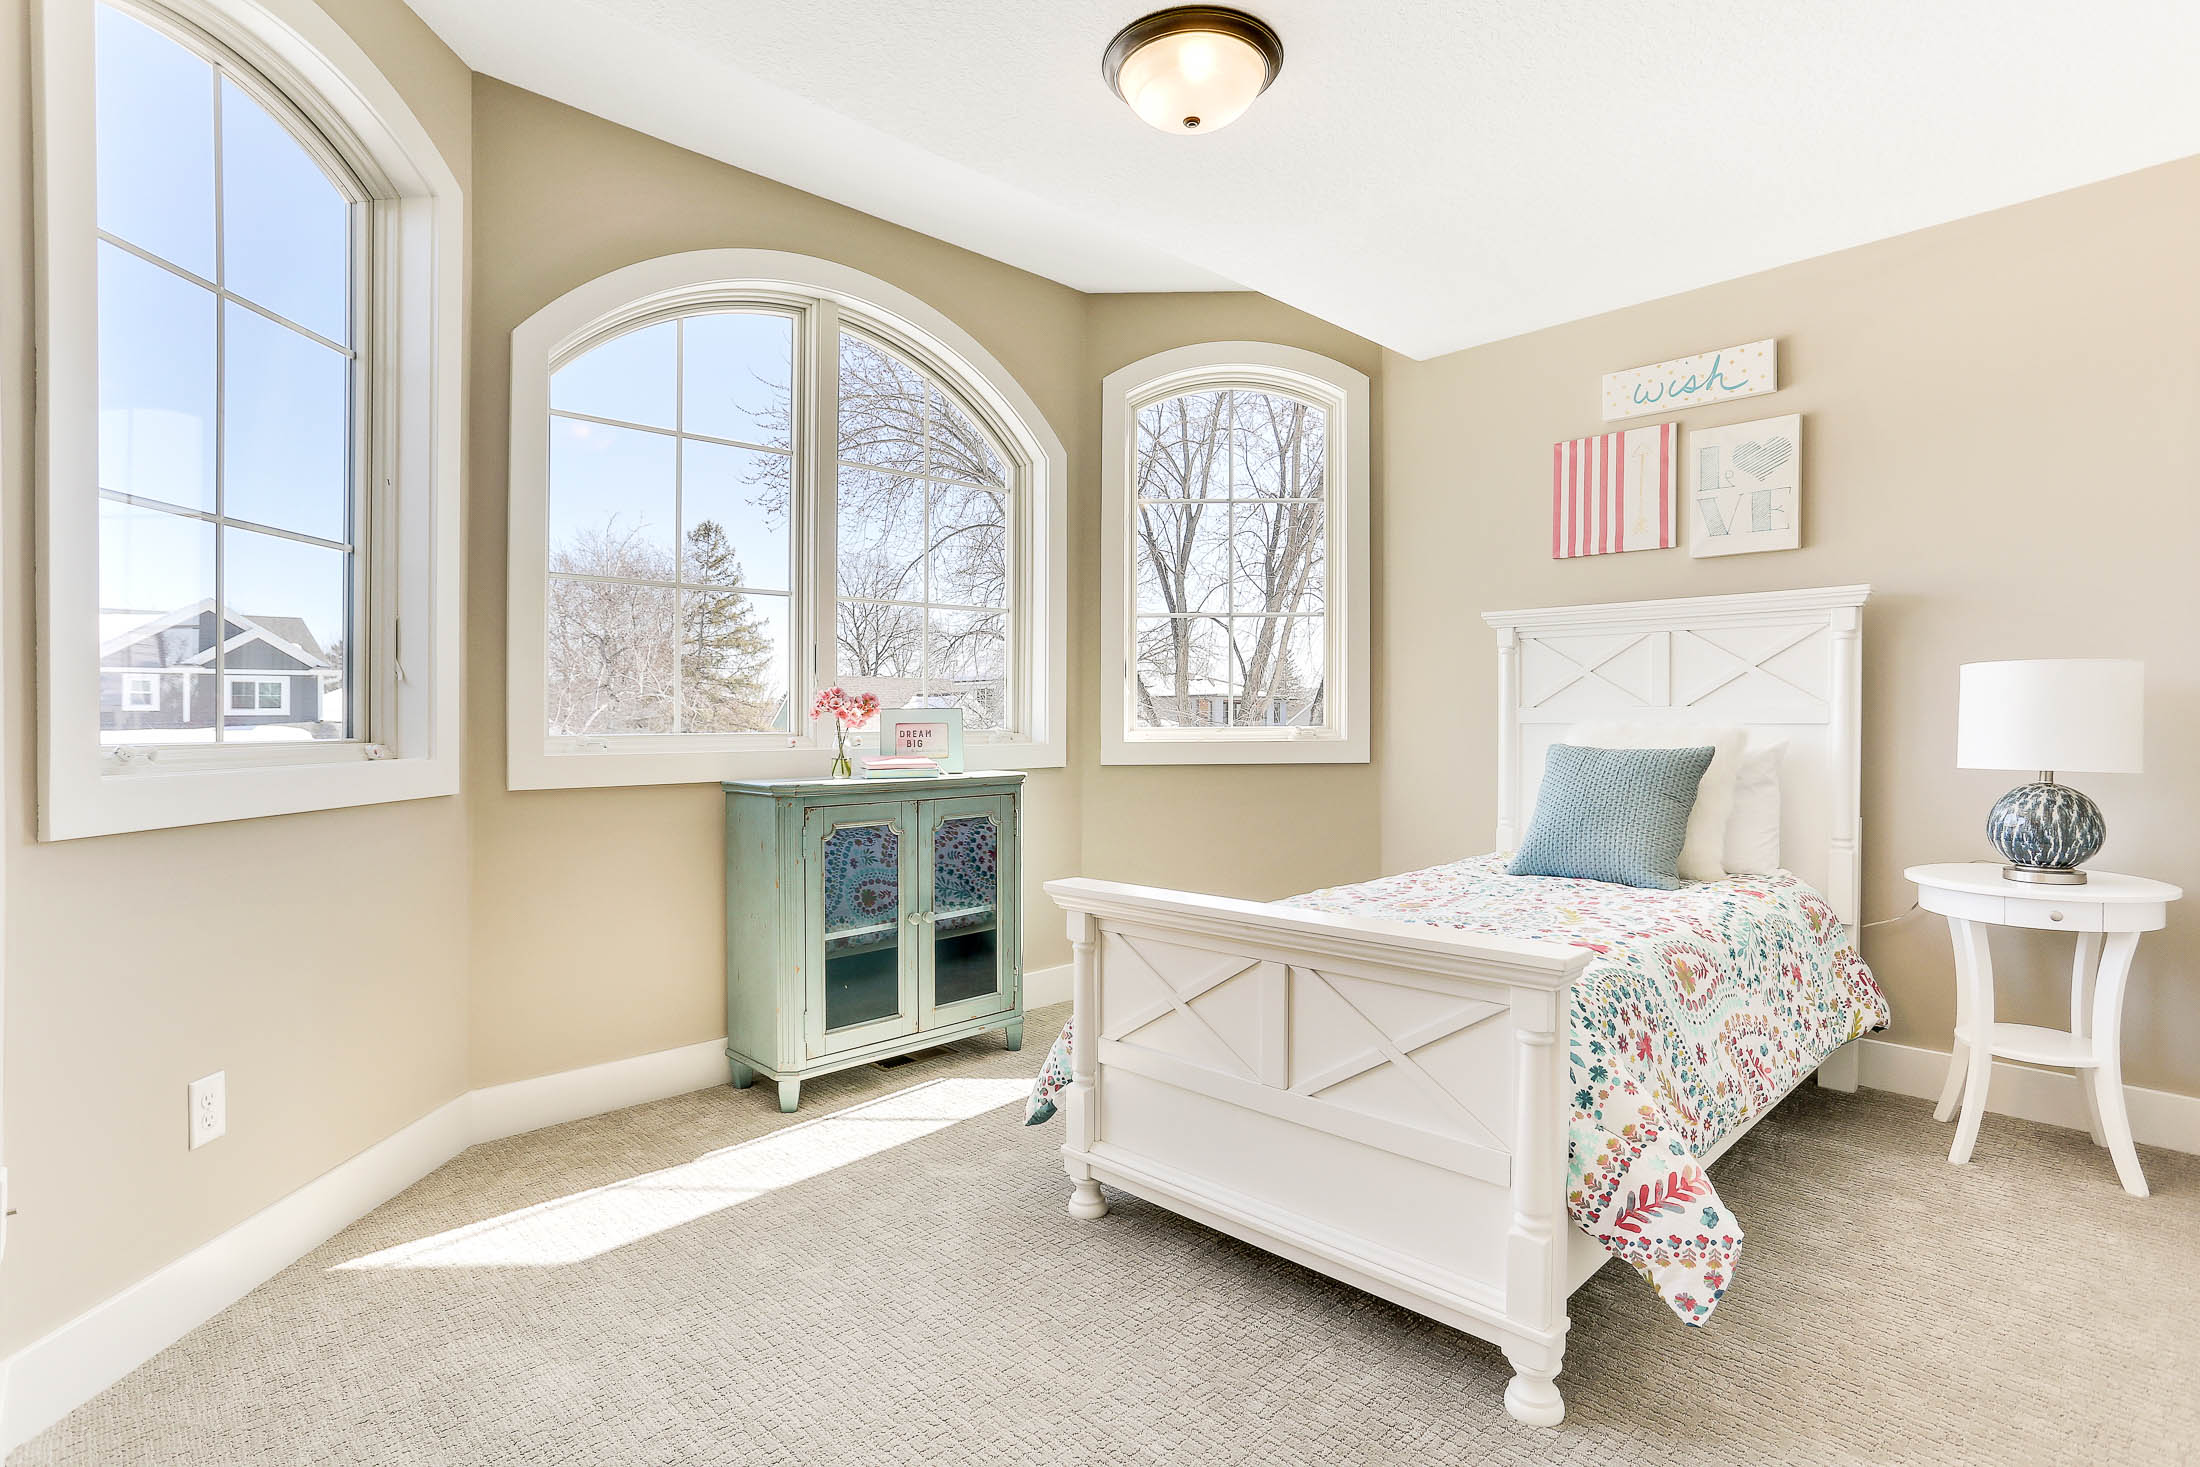 Arched windows in bedroom